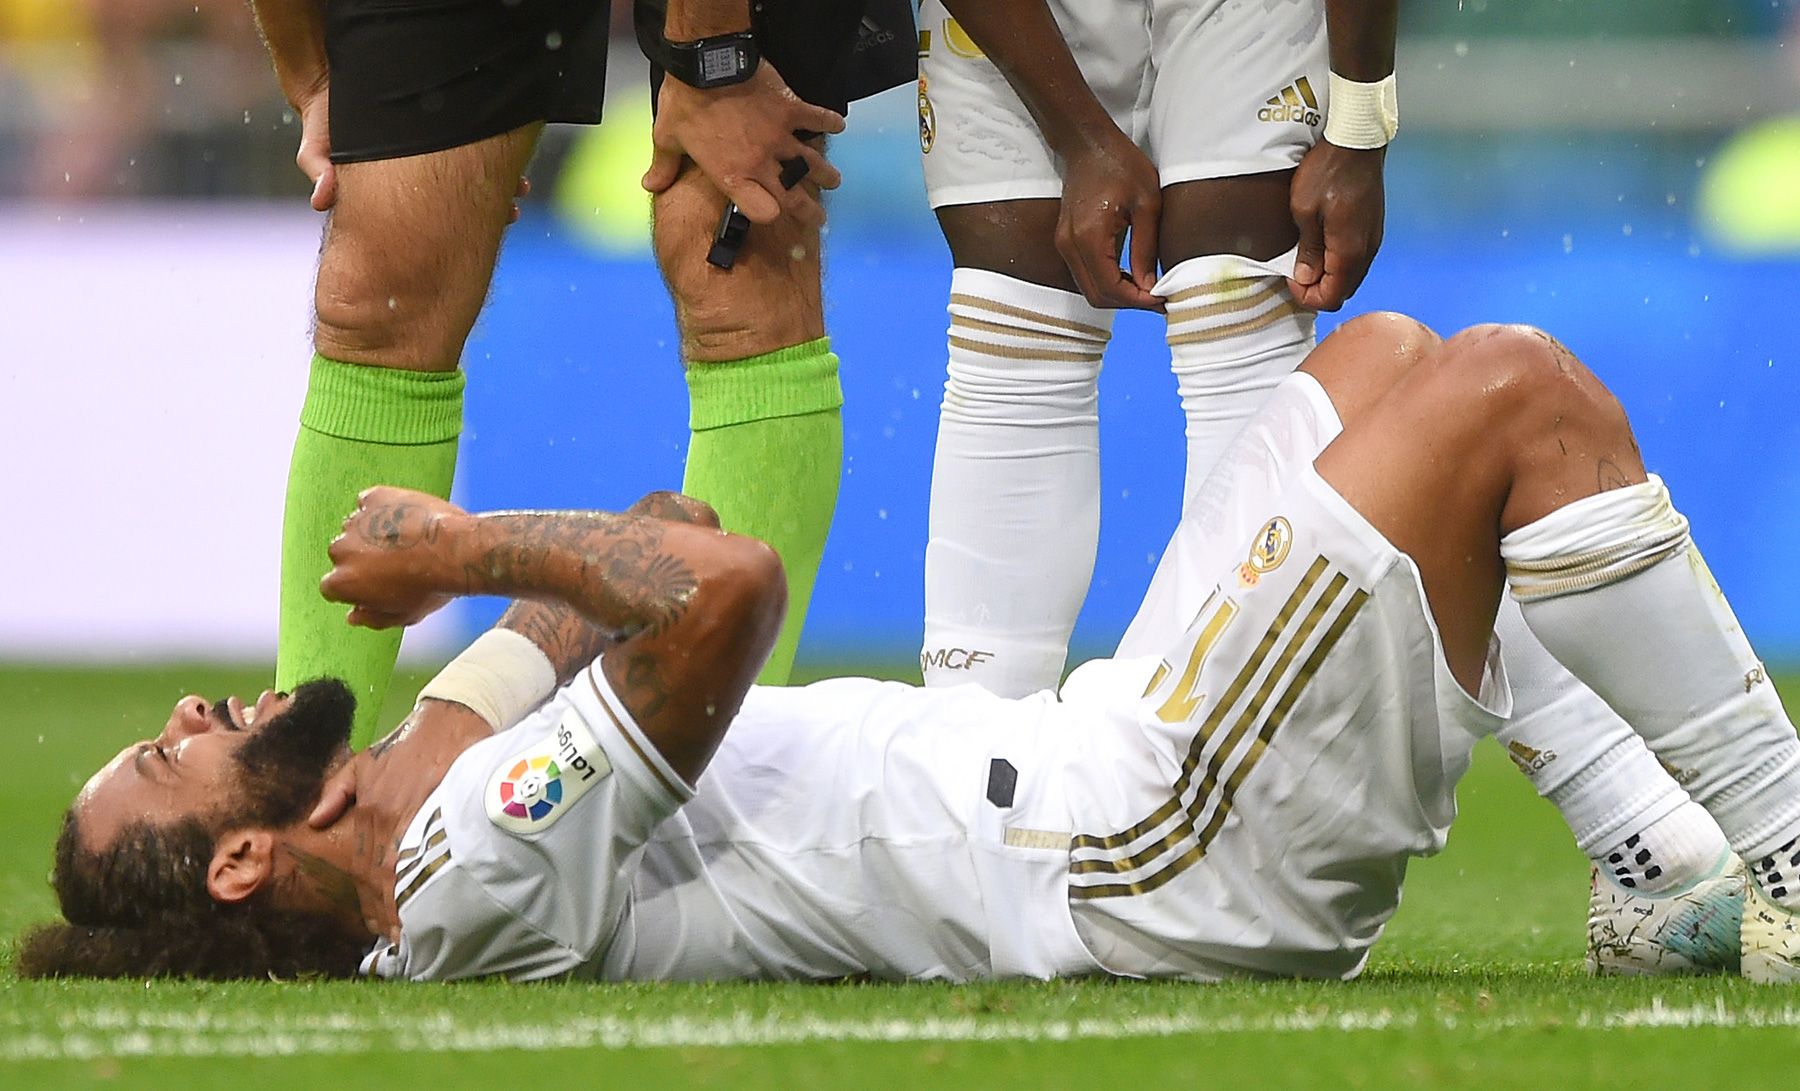 Marcelo hurts  of an injury in the floor